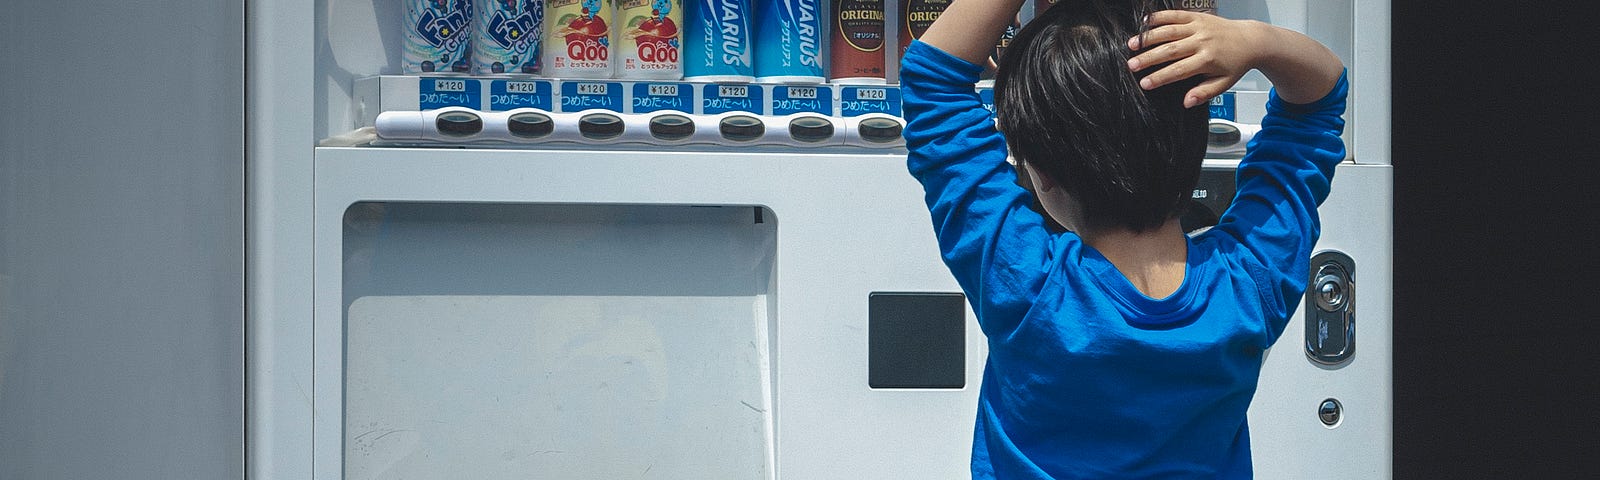 In this photo, we have a boy in front of a vending machine, trying to figure out what soft drink to choose.